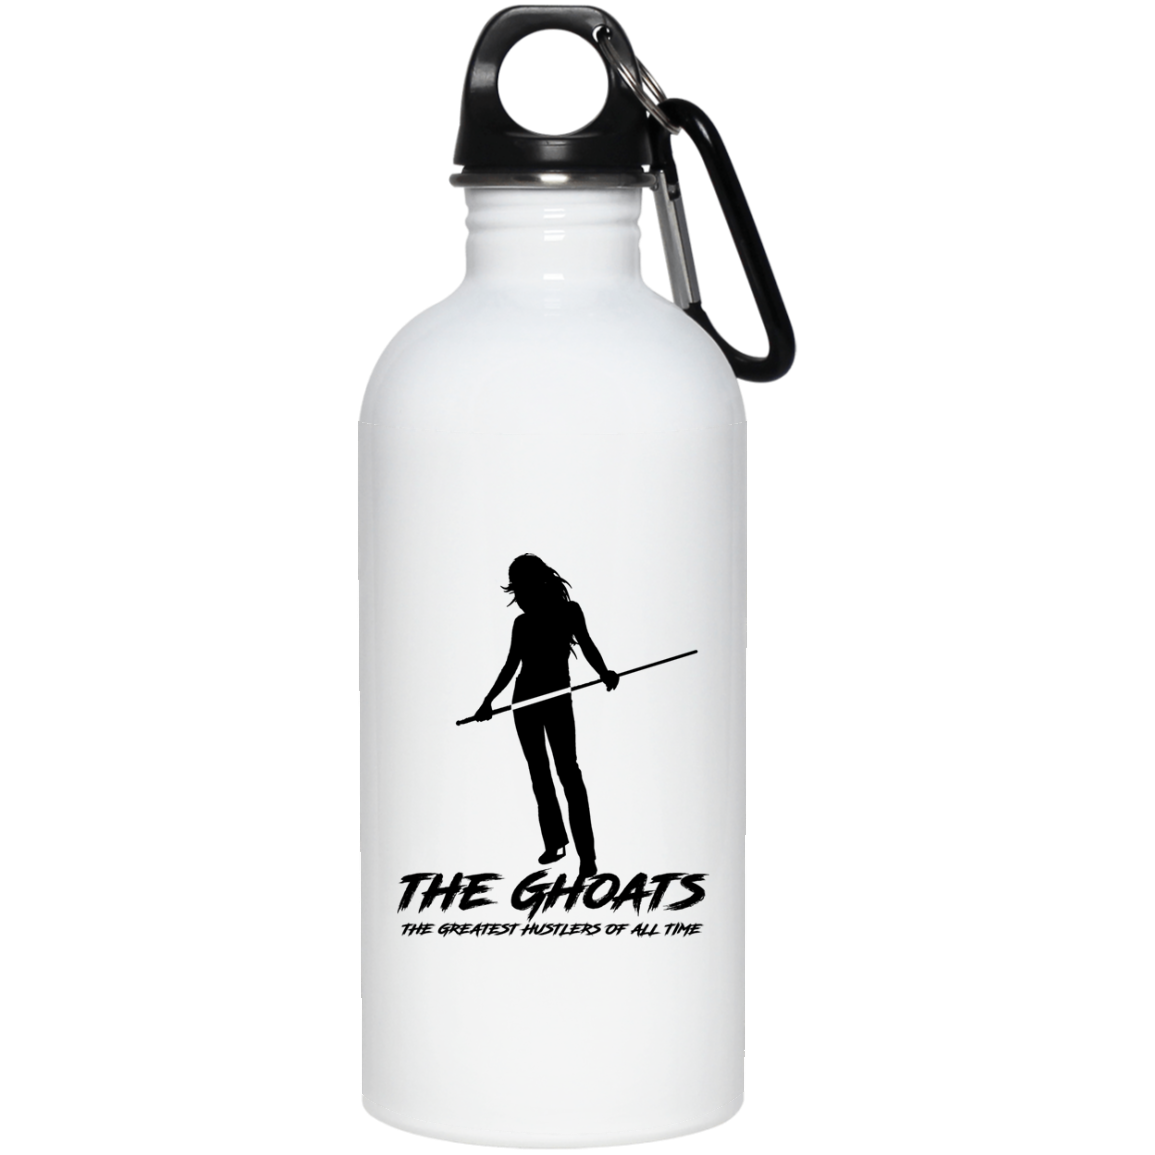 The GHOATS custom design #36. Shark Sighted. Female Pool Shark. Shoot At Your Own Risk. Pool / Billiards. 20 oz. Stainless Steel Water Bottle